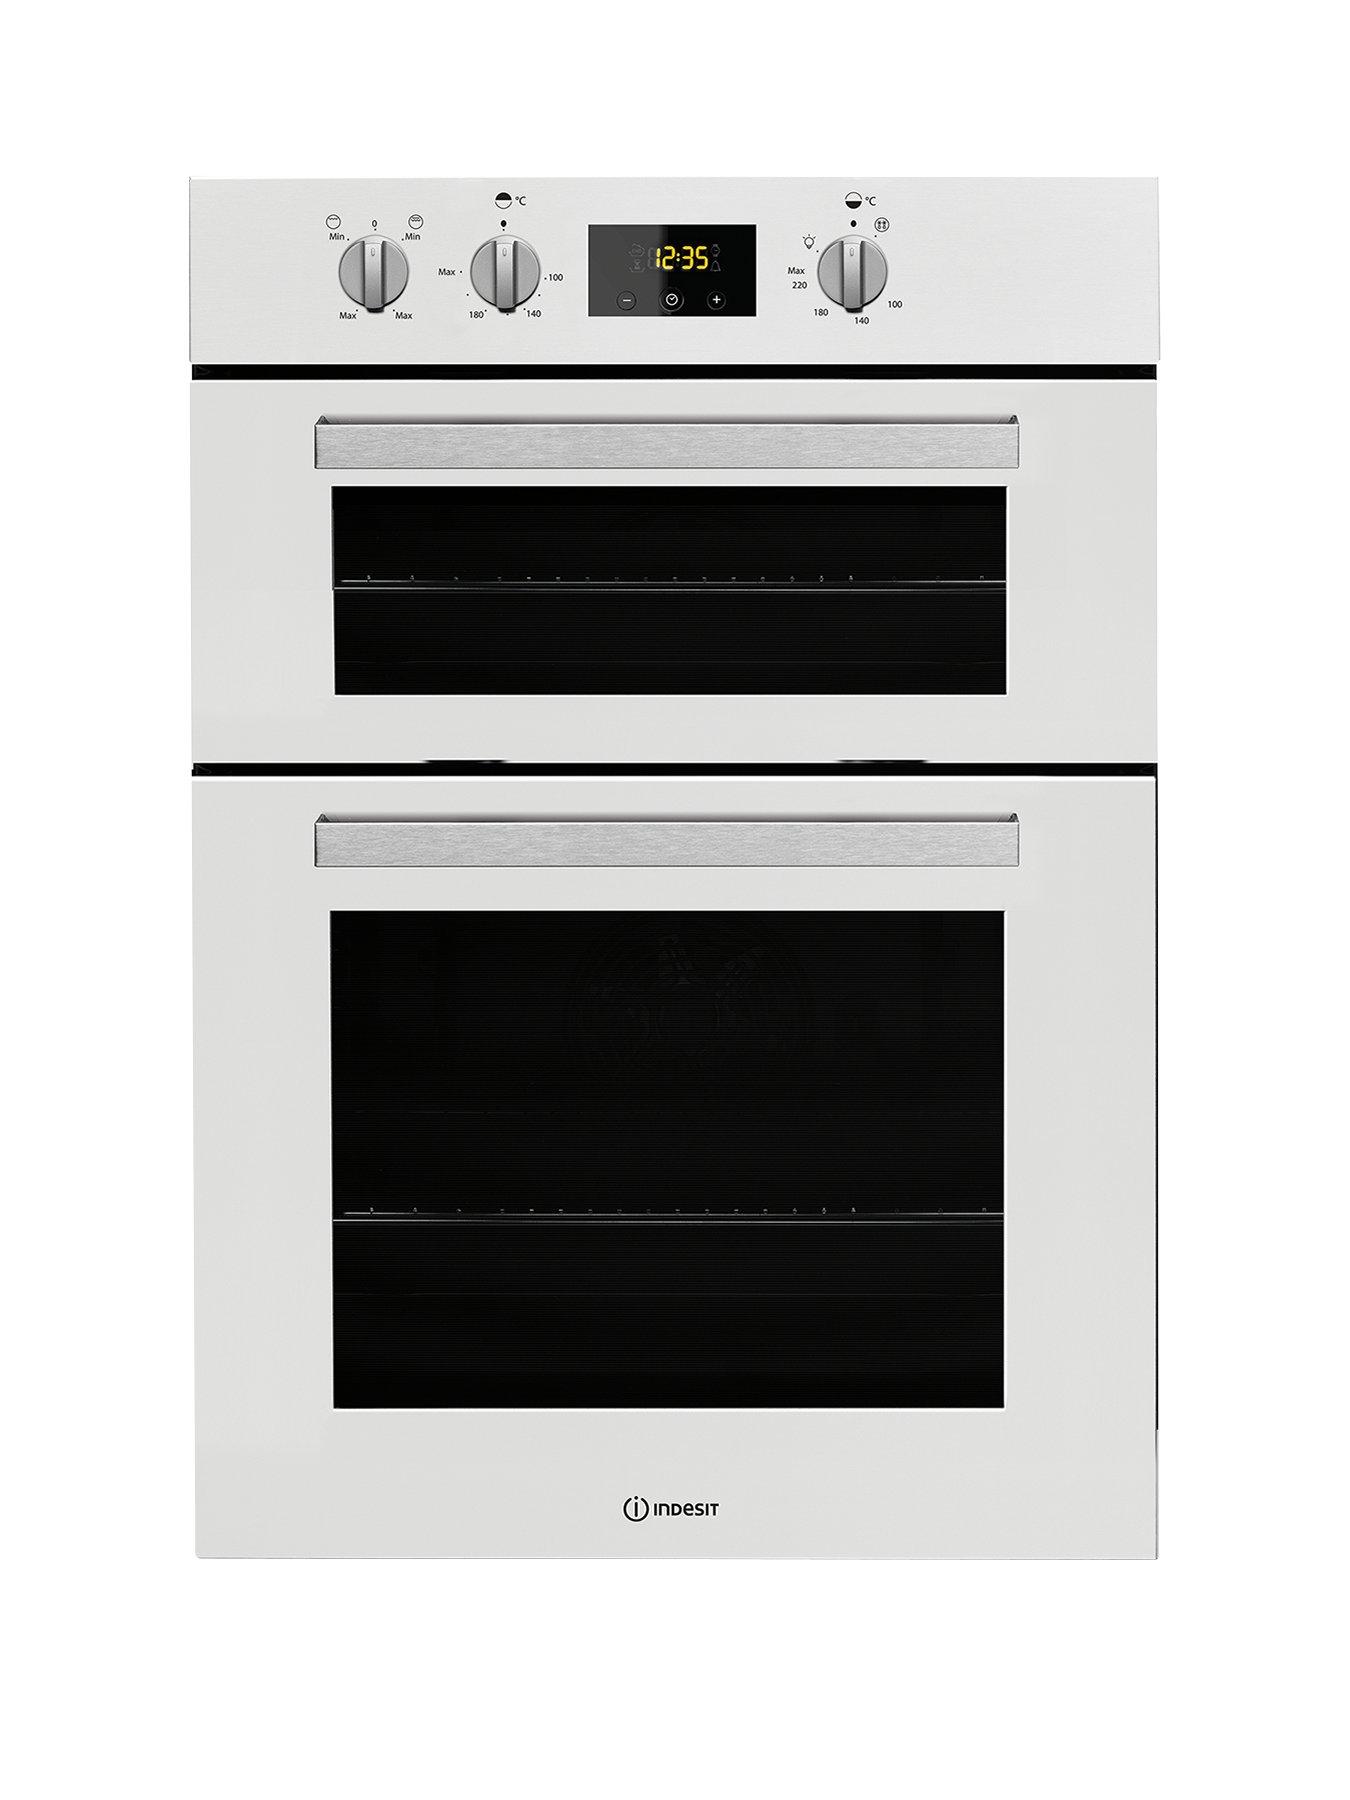 electric oven uk